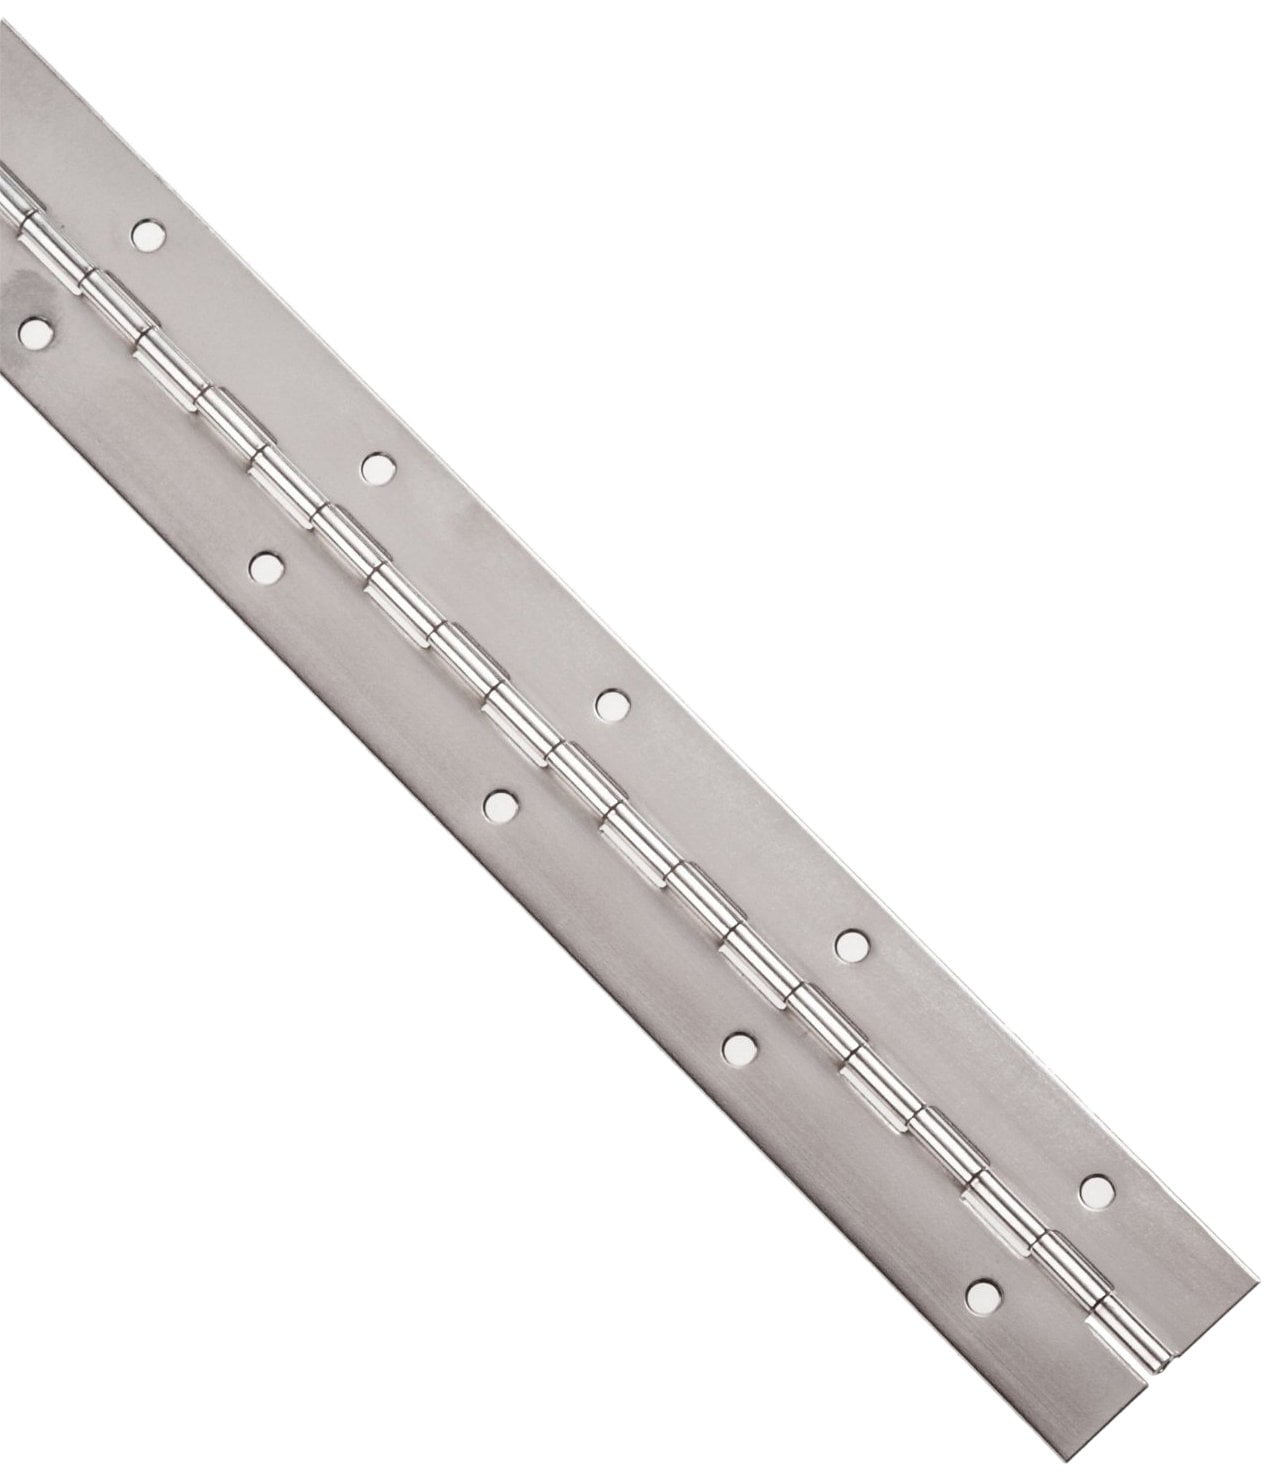 1/2 Knuckle Length 0.06 Leaf Thickness Unfinished 1/8 Pin Diameter 6 Long Aluminum 3003 Continuous Hinge with Holes 2 Open Width Pack of 1